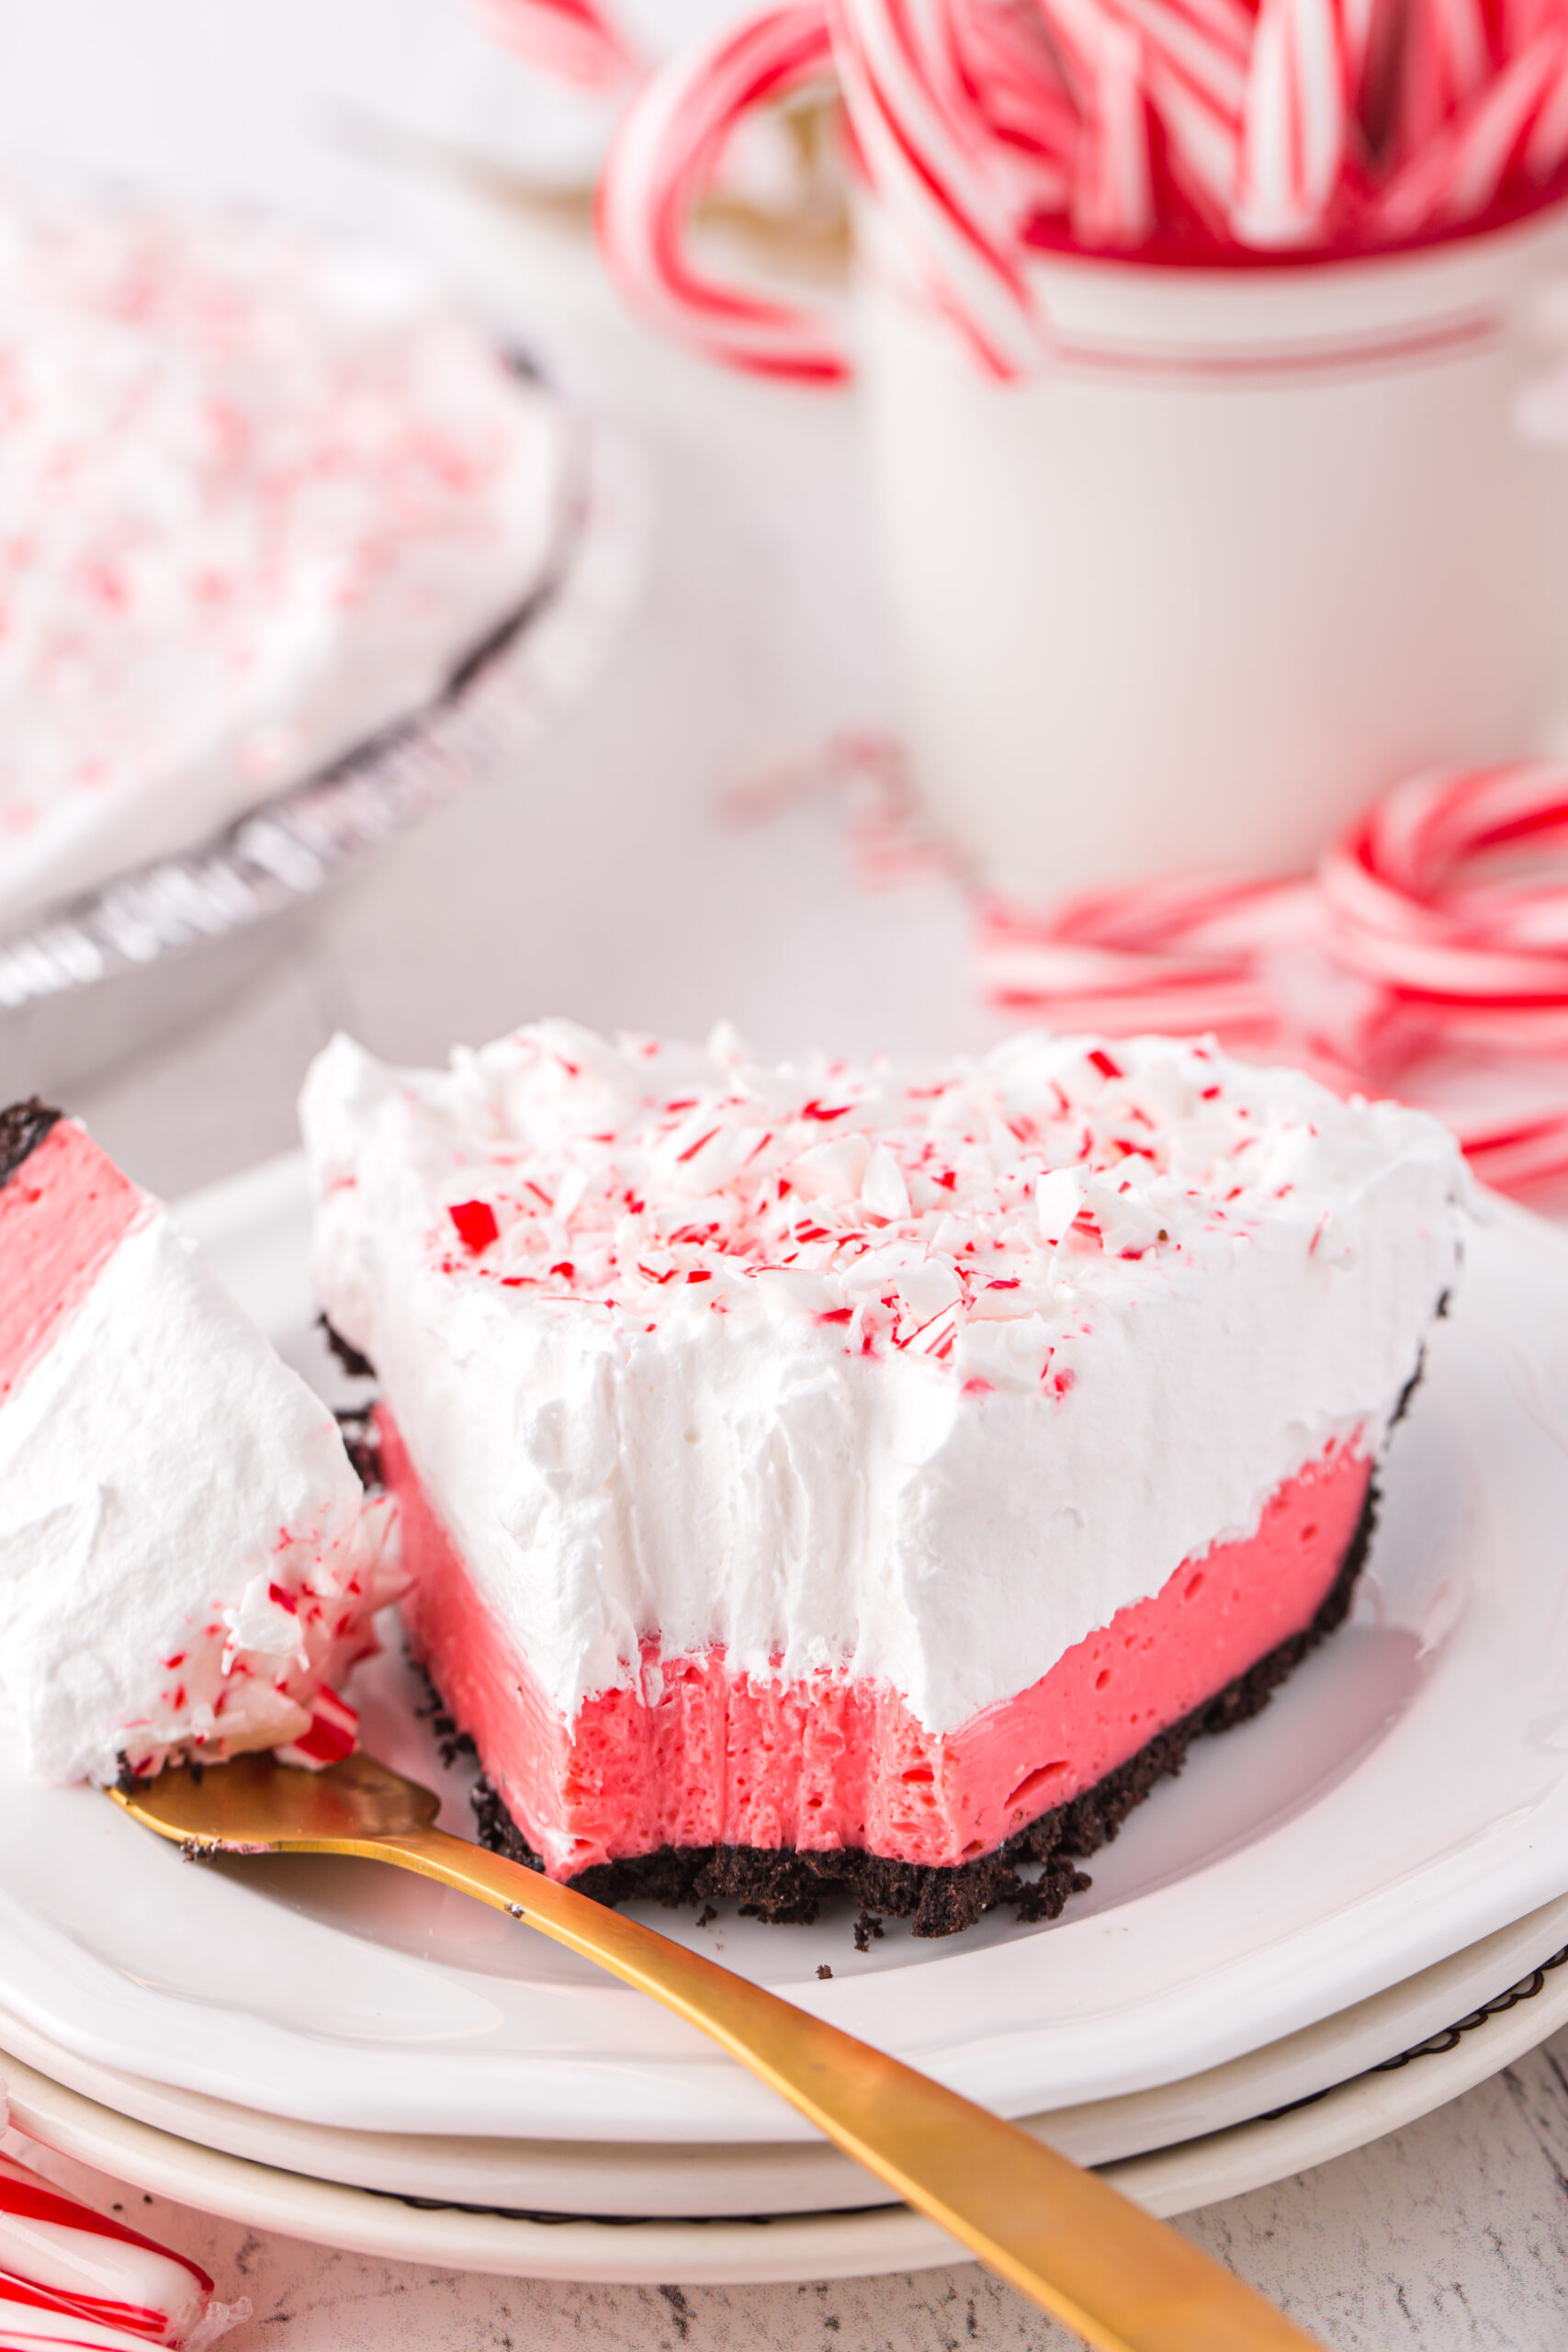 slice of pretty layered peppermint pie on a small white plate with a bite taken out of it with a fork. Gold fork with pie on it resting next to the pie on the plate. Whole pie teased in the background.